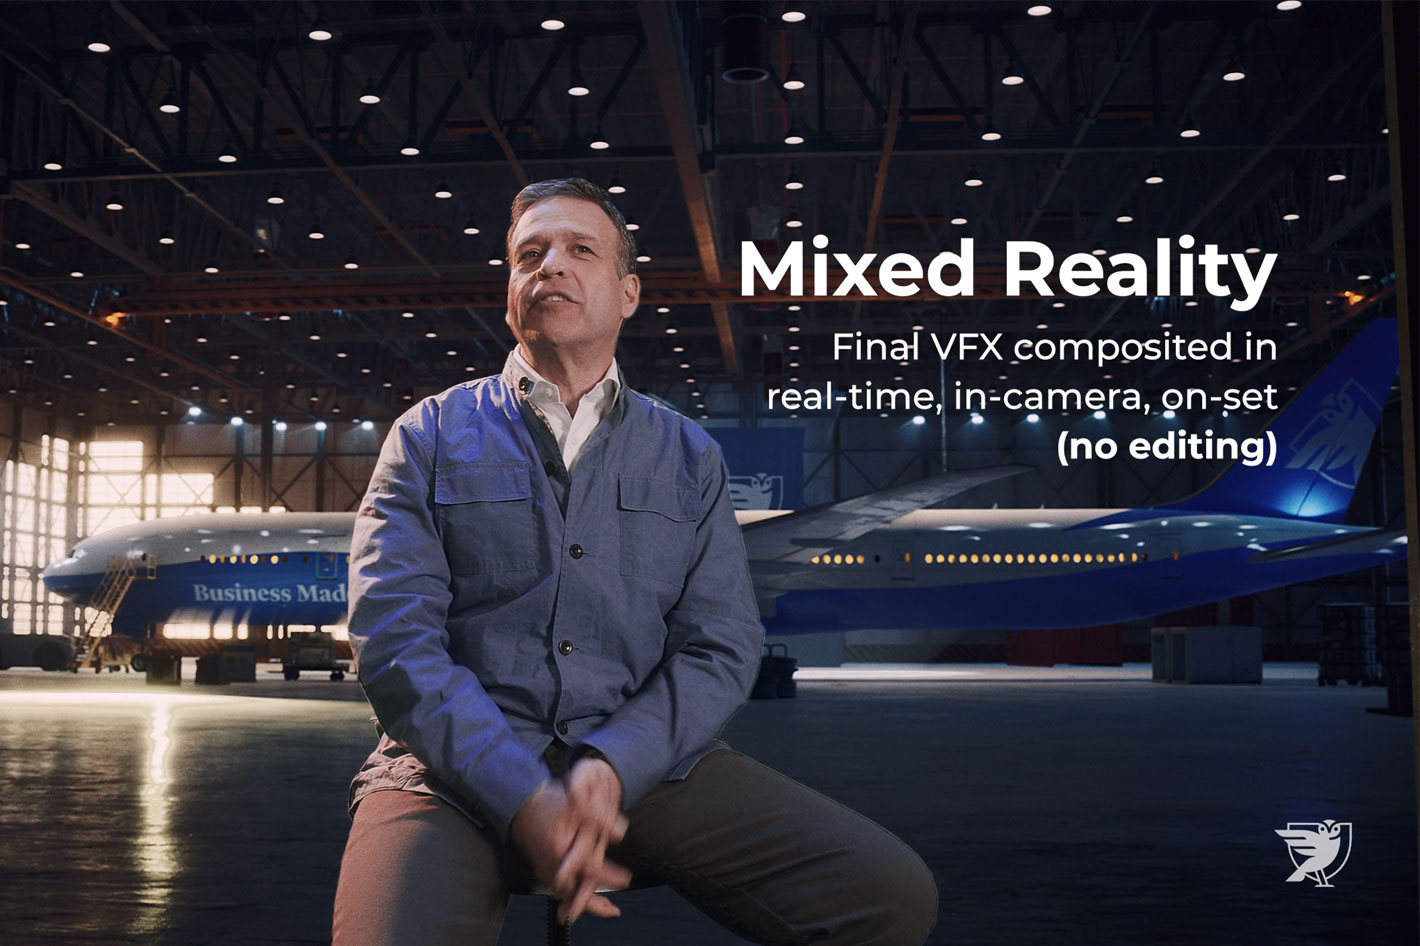 Mo-Sys: using Virtual Production to film a plane in a hangar